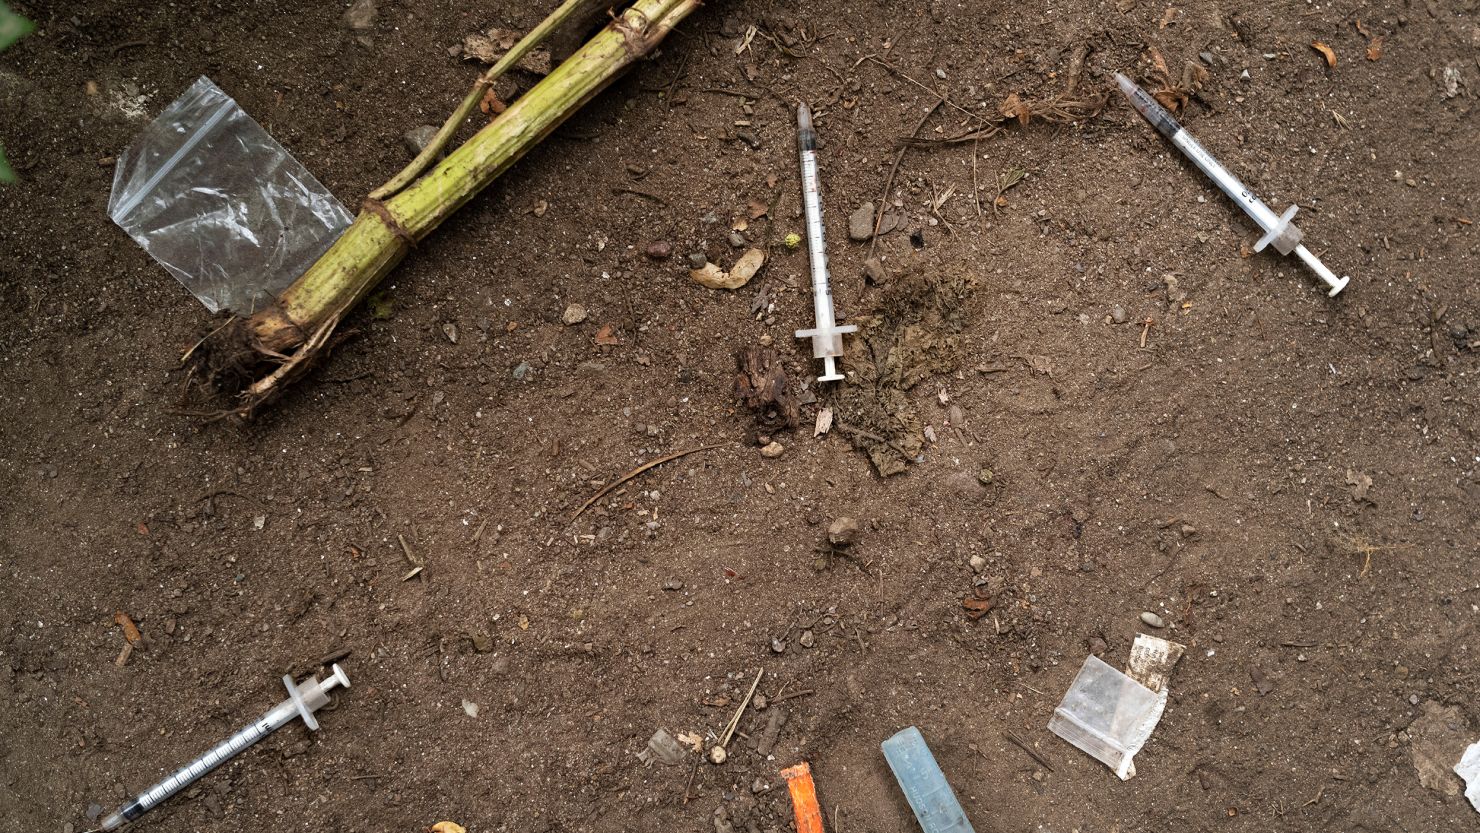 A rise in fentanyl use and the Covid-19 pandemic are thought to be responsible for a dramatic increase in overdose deaths from May 2020 through April 2021